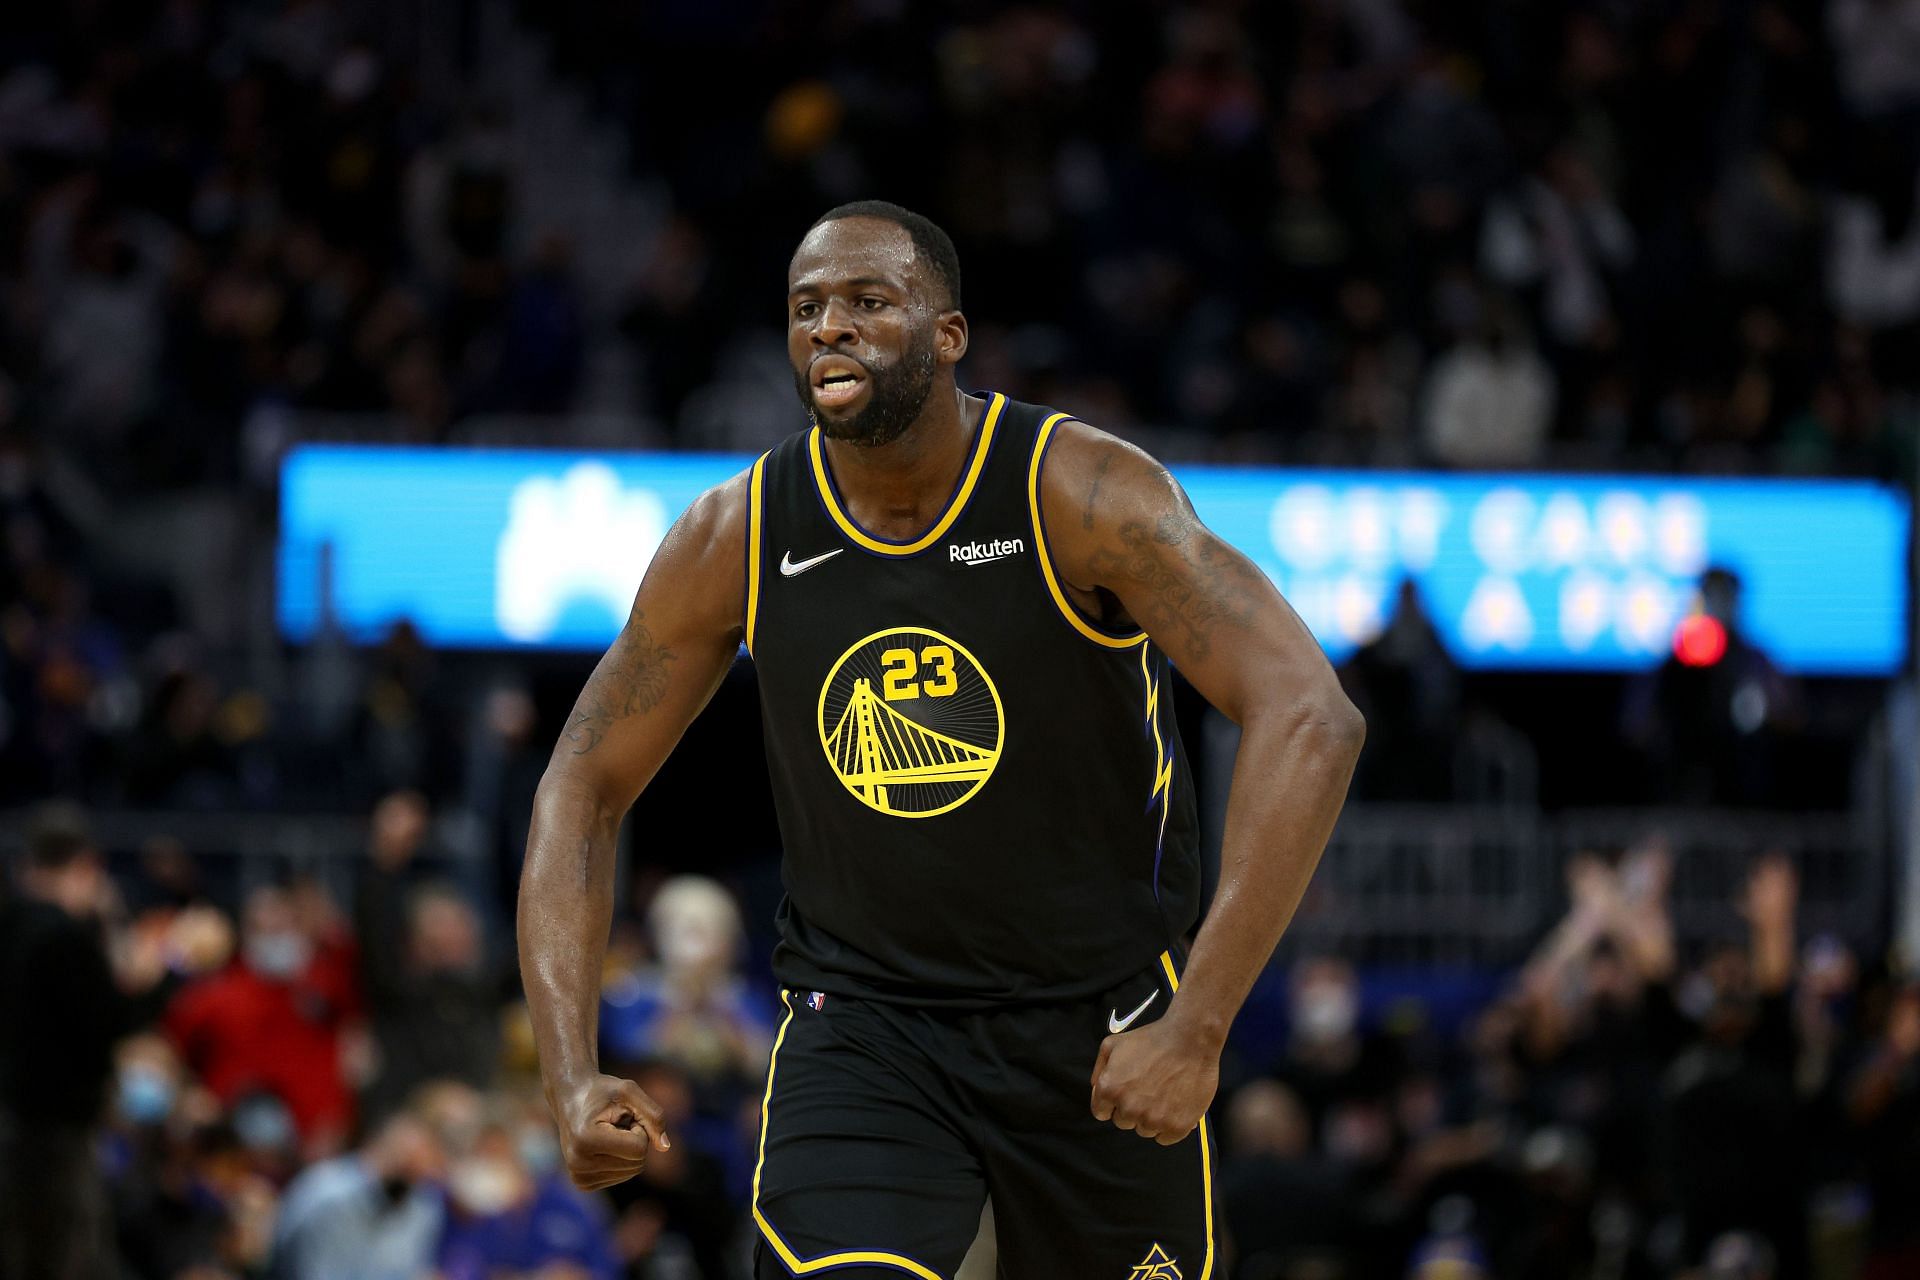 Golden State Warriors forward Draymond Green reacts to a dunk by teammate Jordan Poole against the Miami Heat.